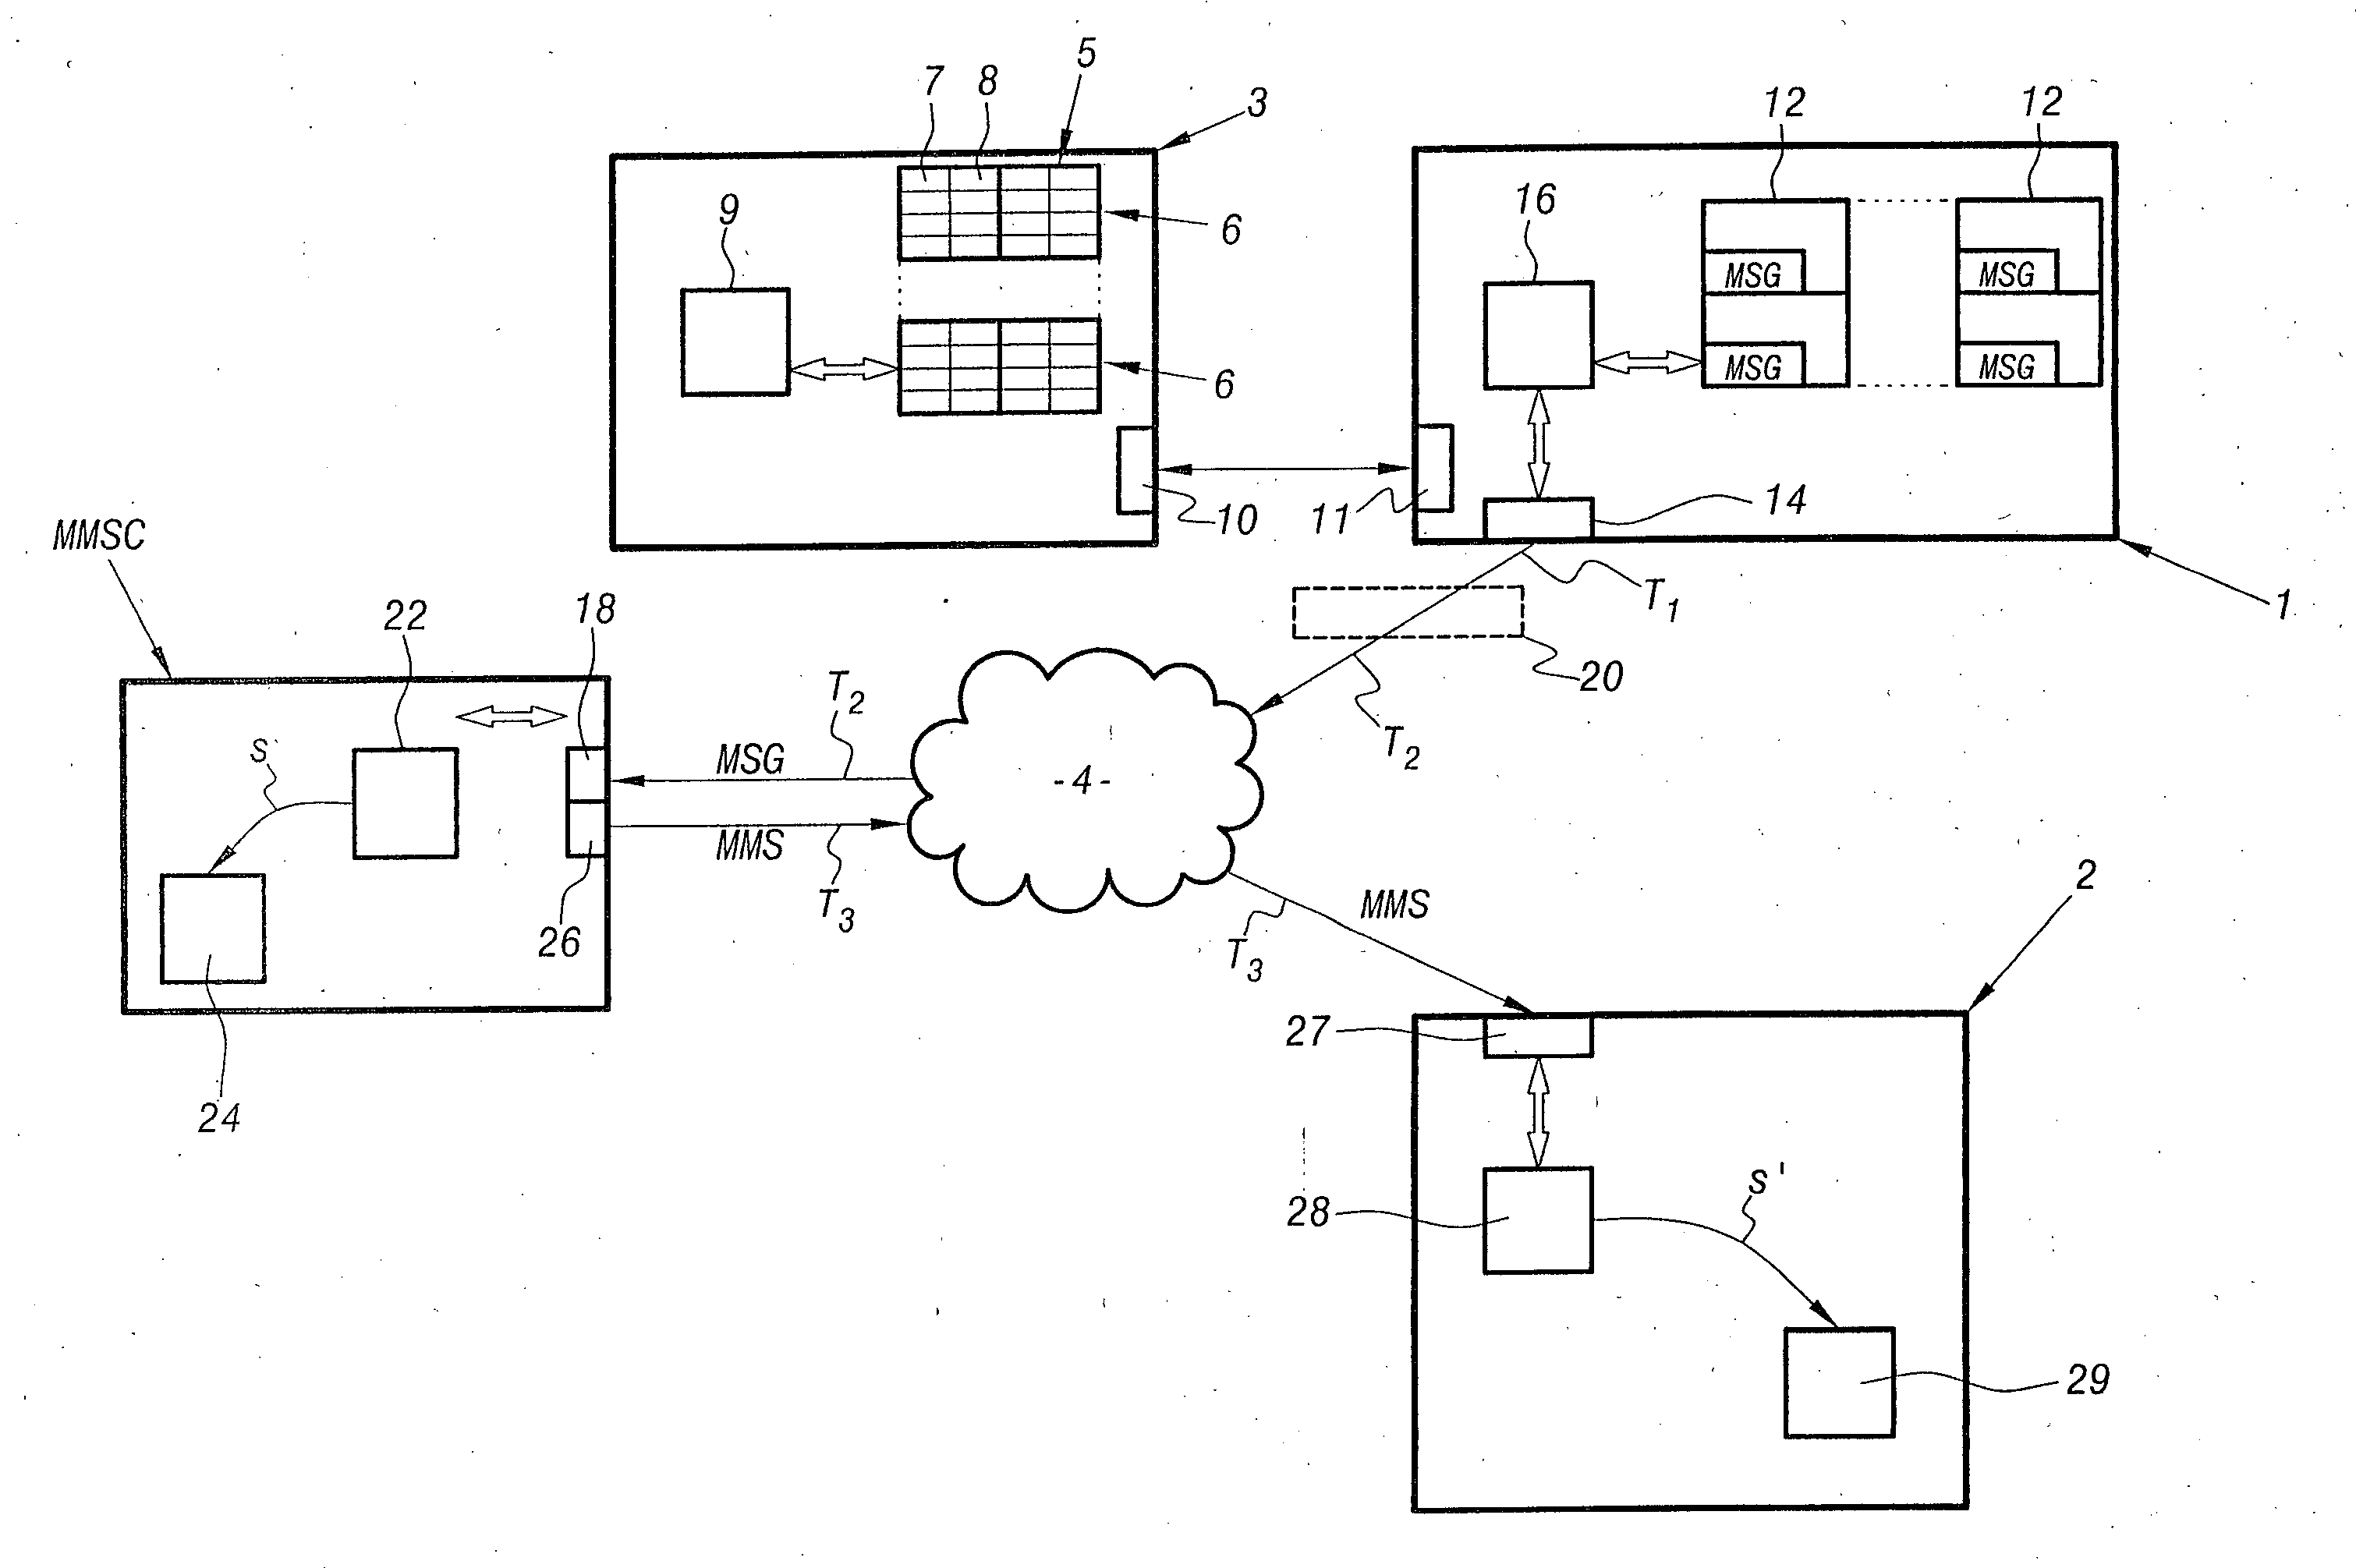 Method and a system for submitting messages deposited in an inbox of a messaging service